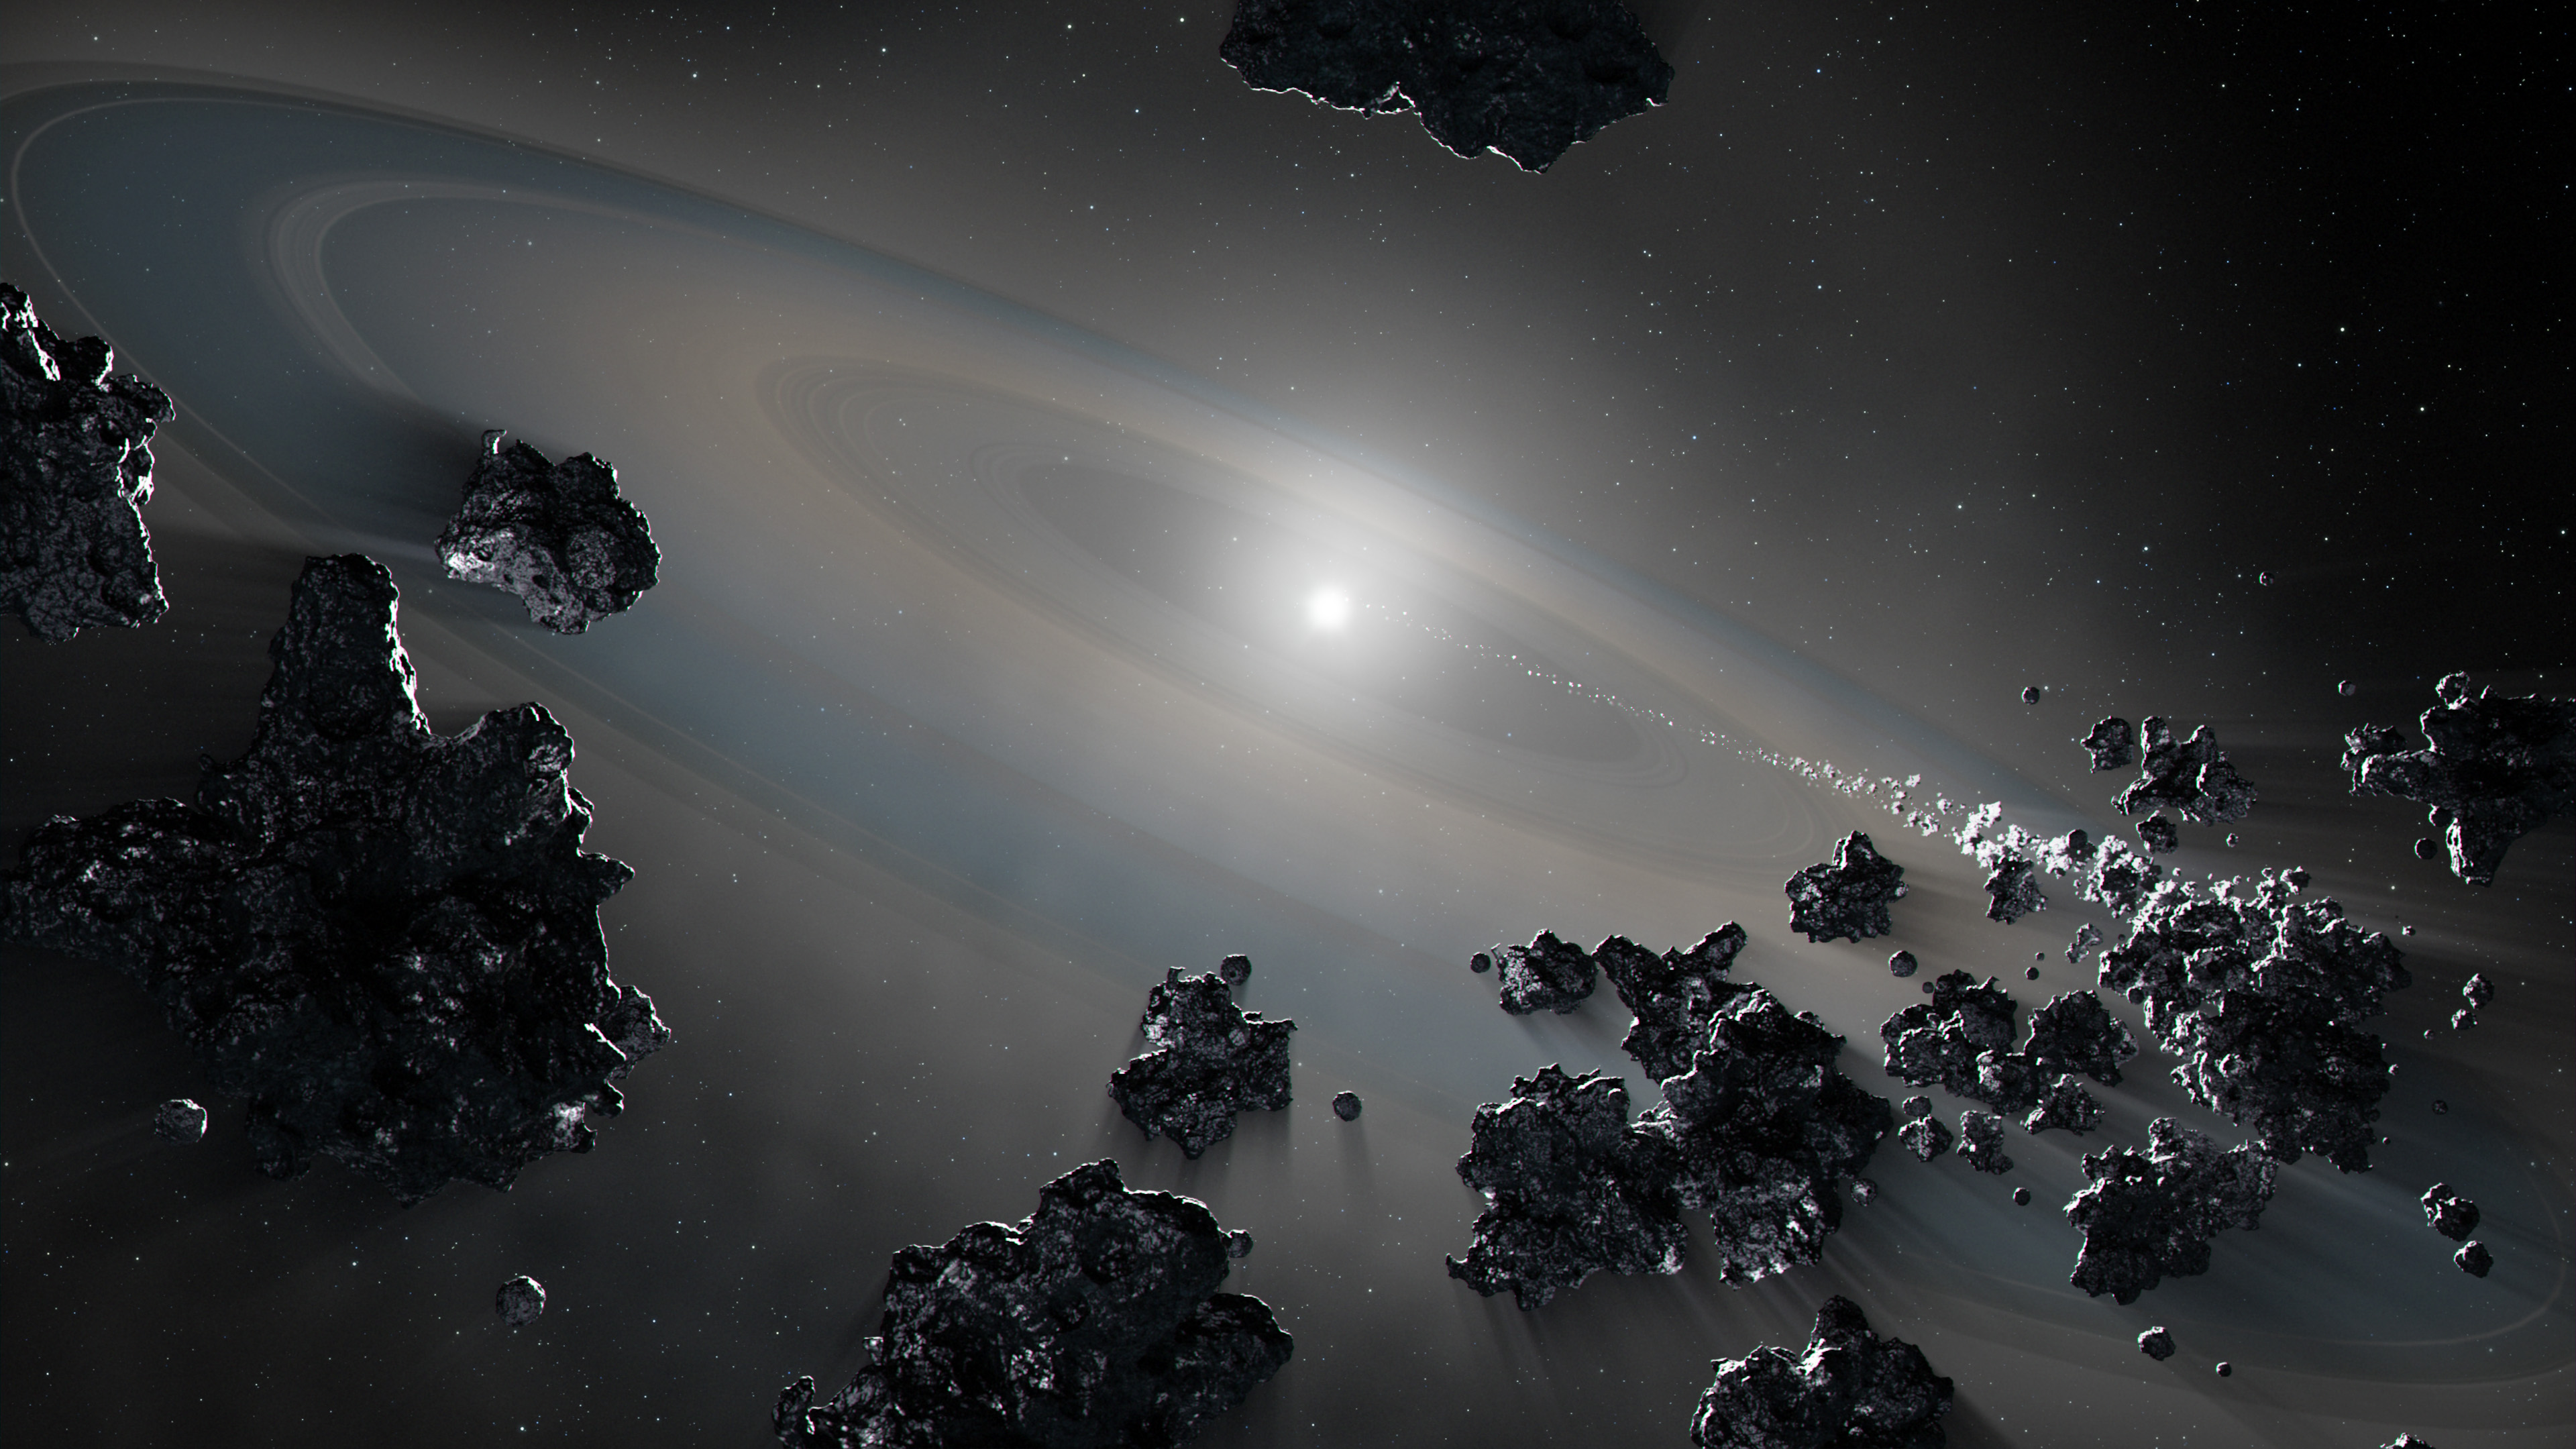 Destructive white dwarf is ripping apart planetary pieces